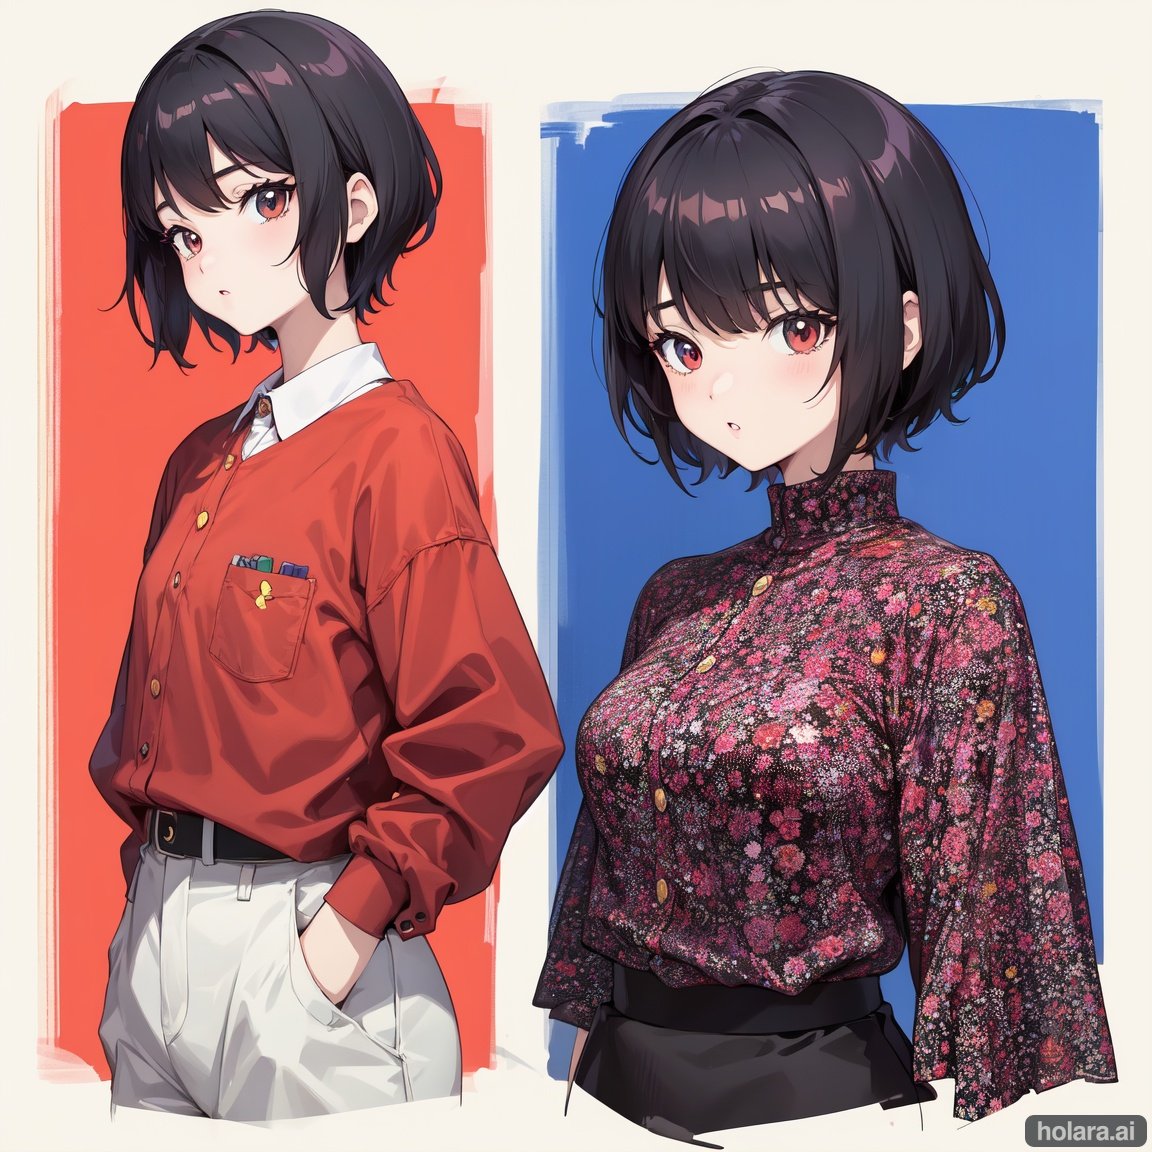 Image of Retro, old fashioned anime in manga style coloring, short hair, simple background, lineart